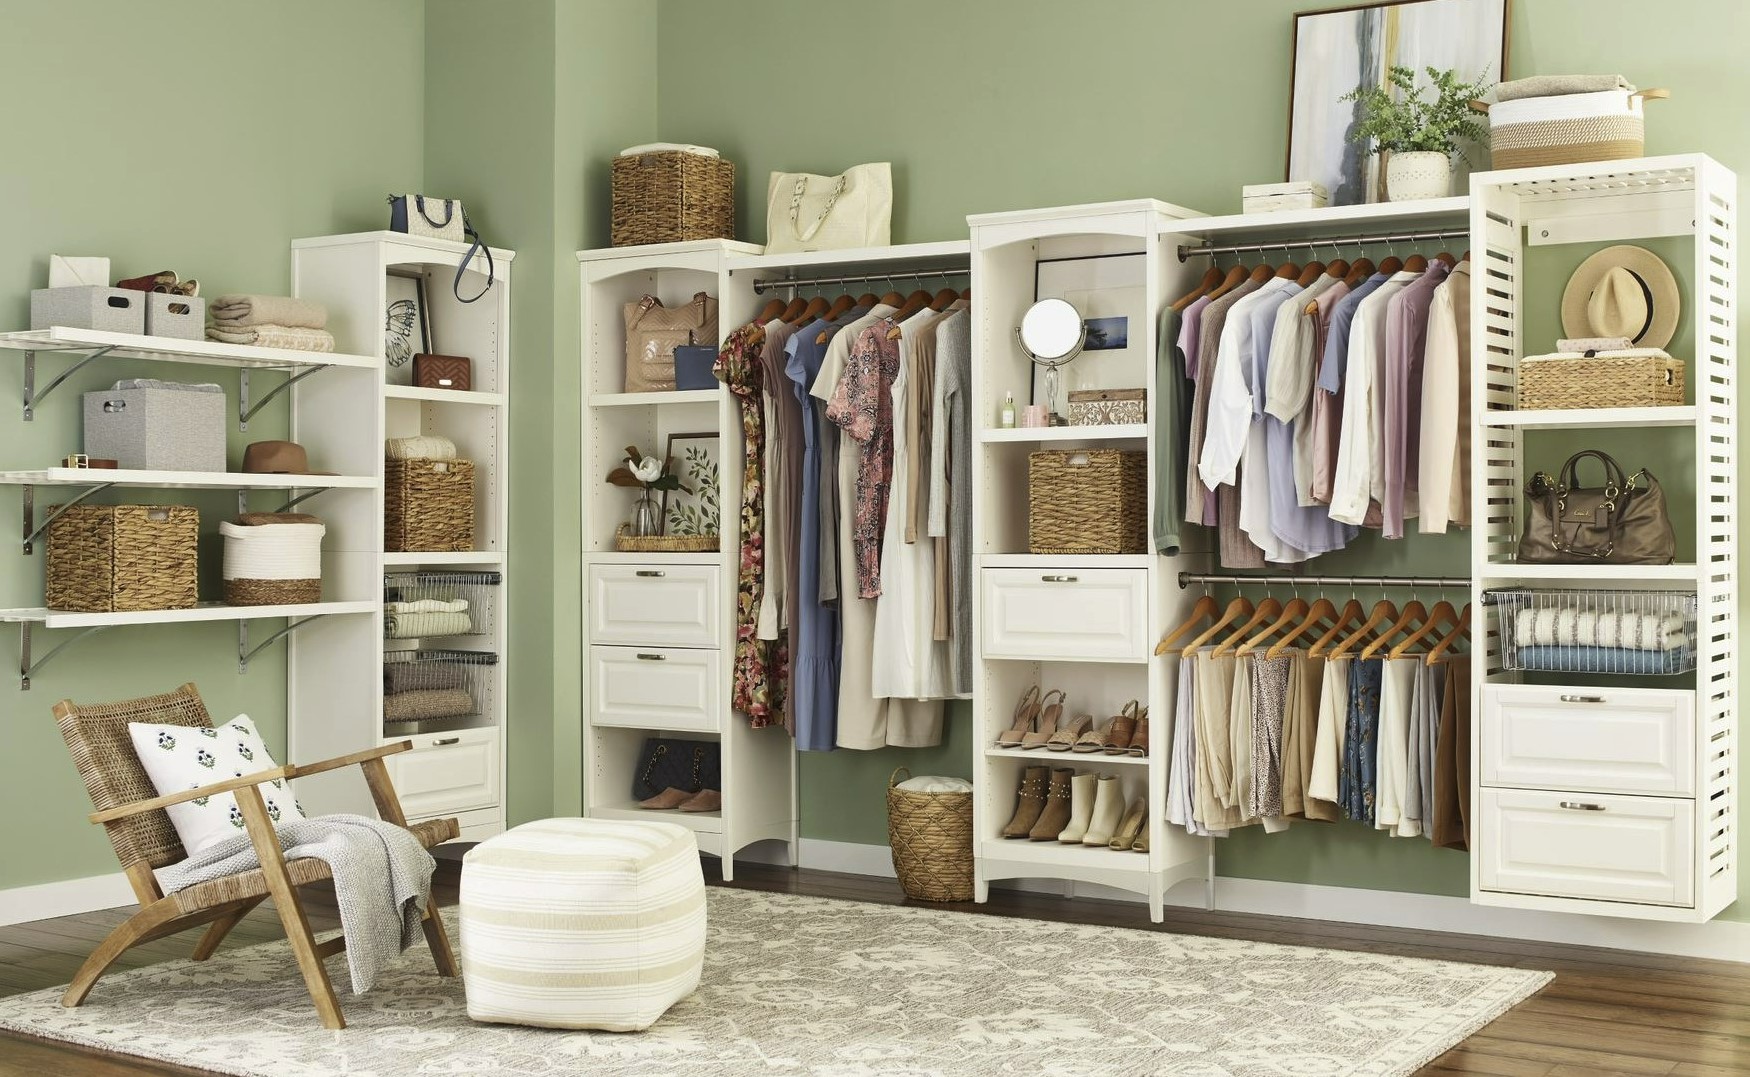 allen + roth Hartford White Laundry Room Storage Collection